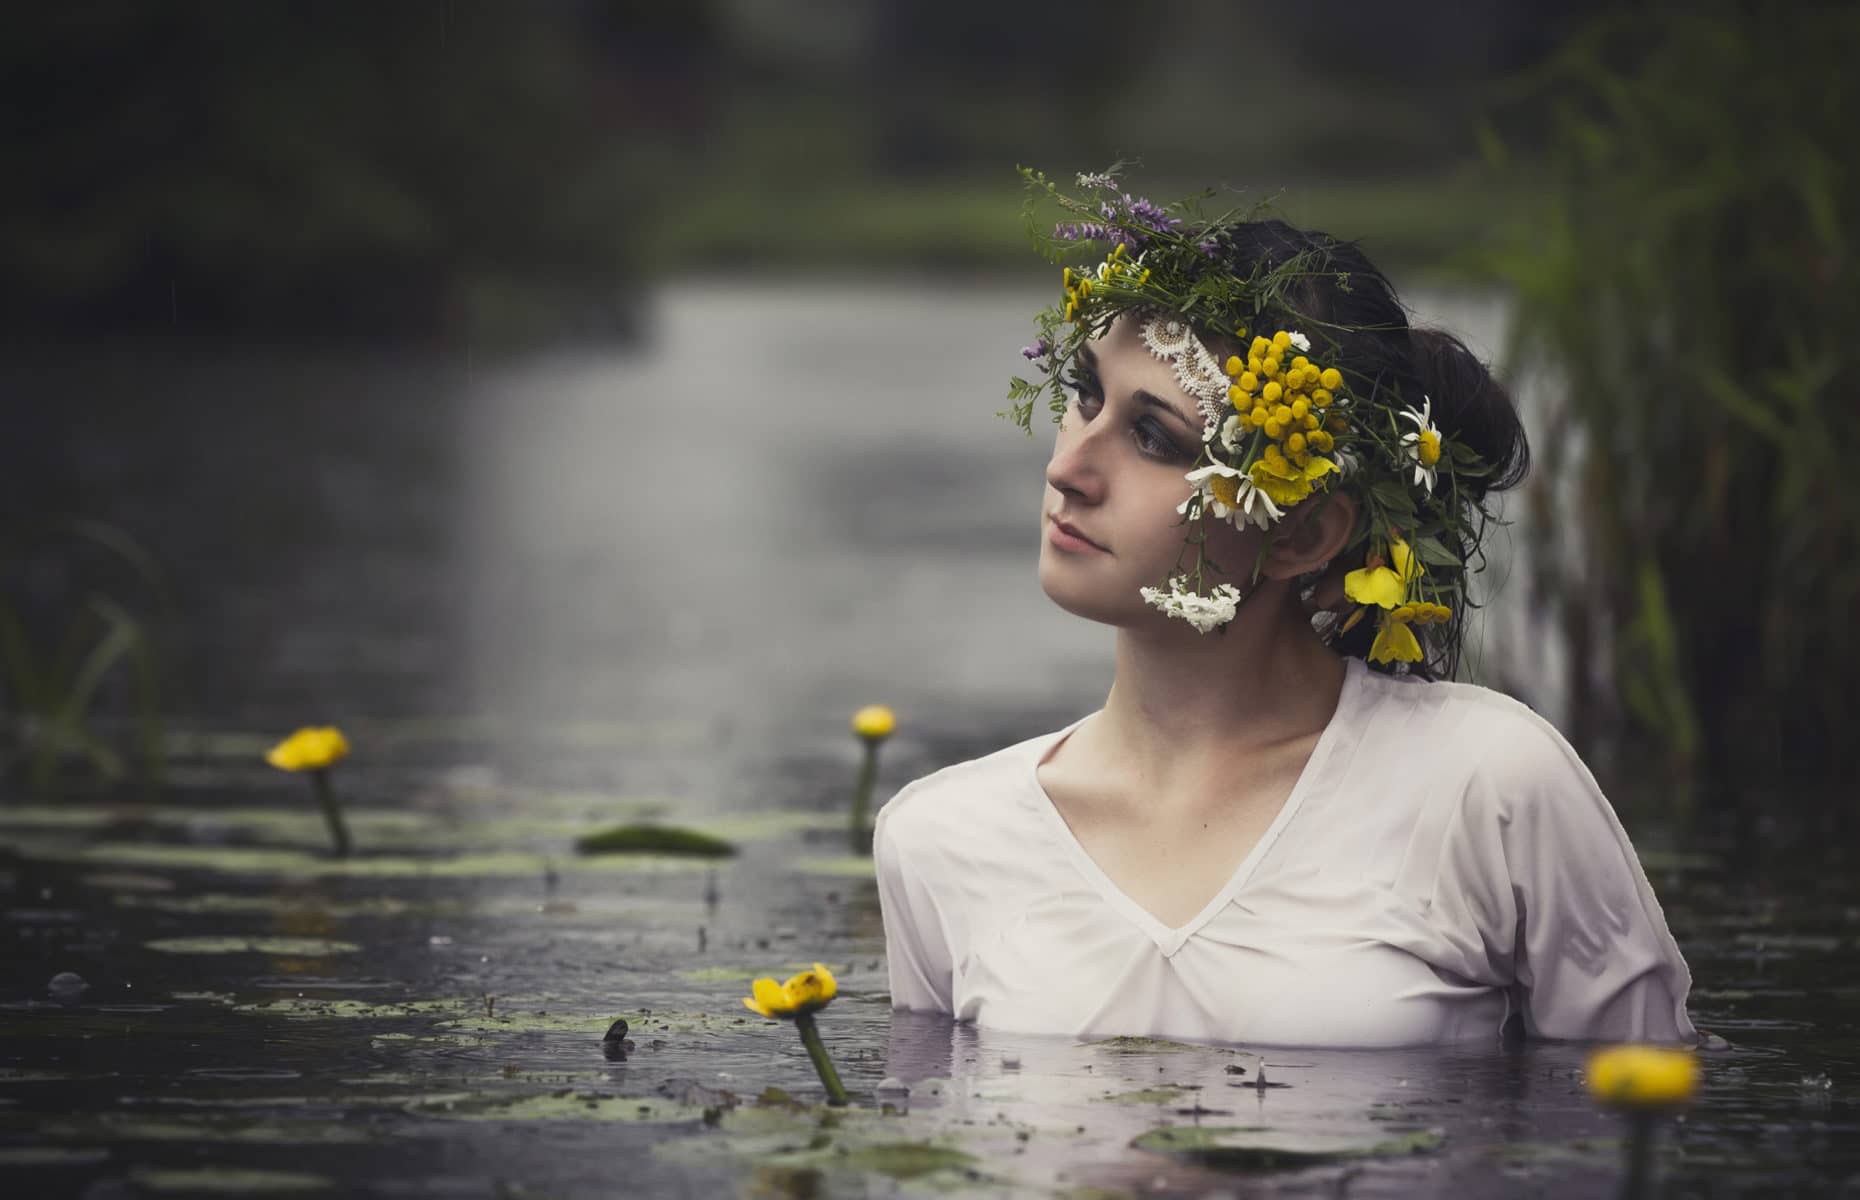 Art Woman with wreath on her head in a swamp in the woods. Wet witch Girl in the lake, mystical mysterious woman bathing outdoors in the swamp. Wreath of wildflowers on her head